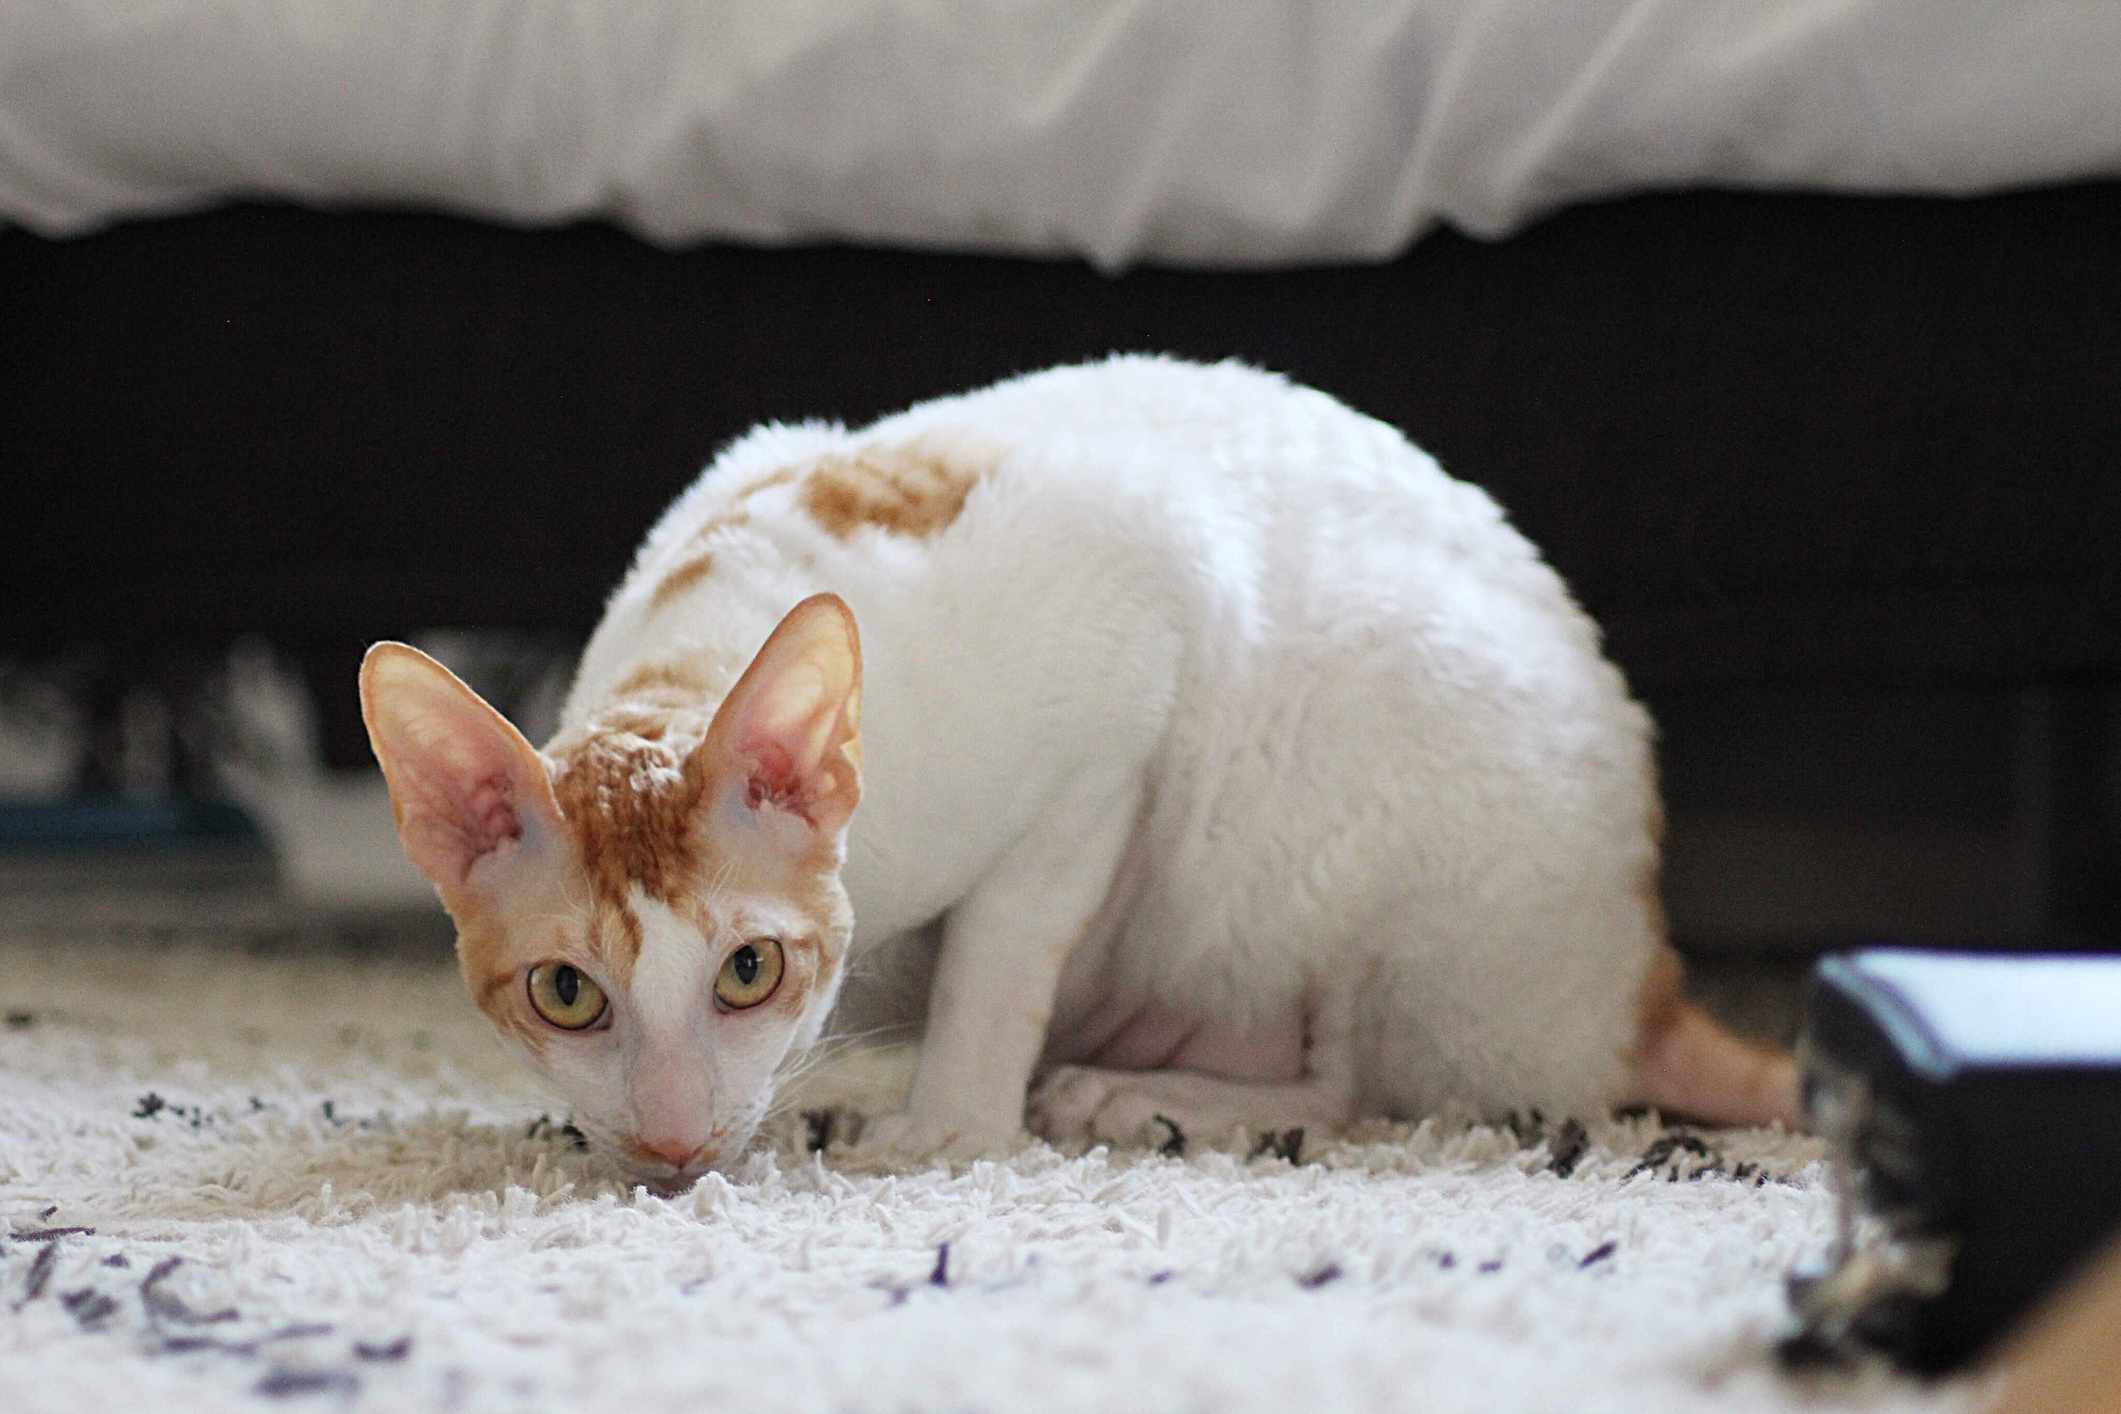 Cornish Rex cat sitting on floor with mouth touching the carpet.